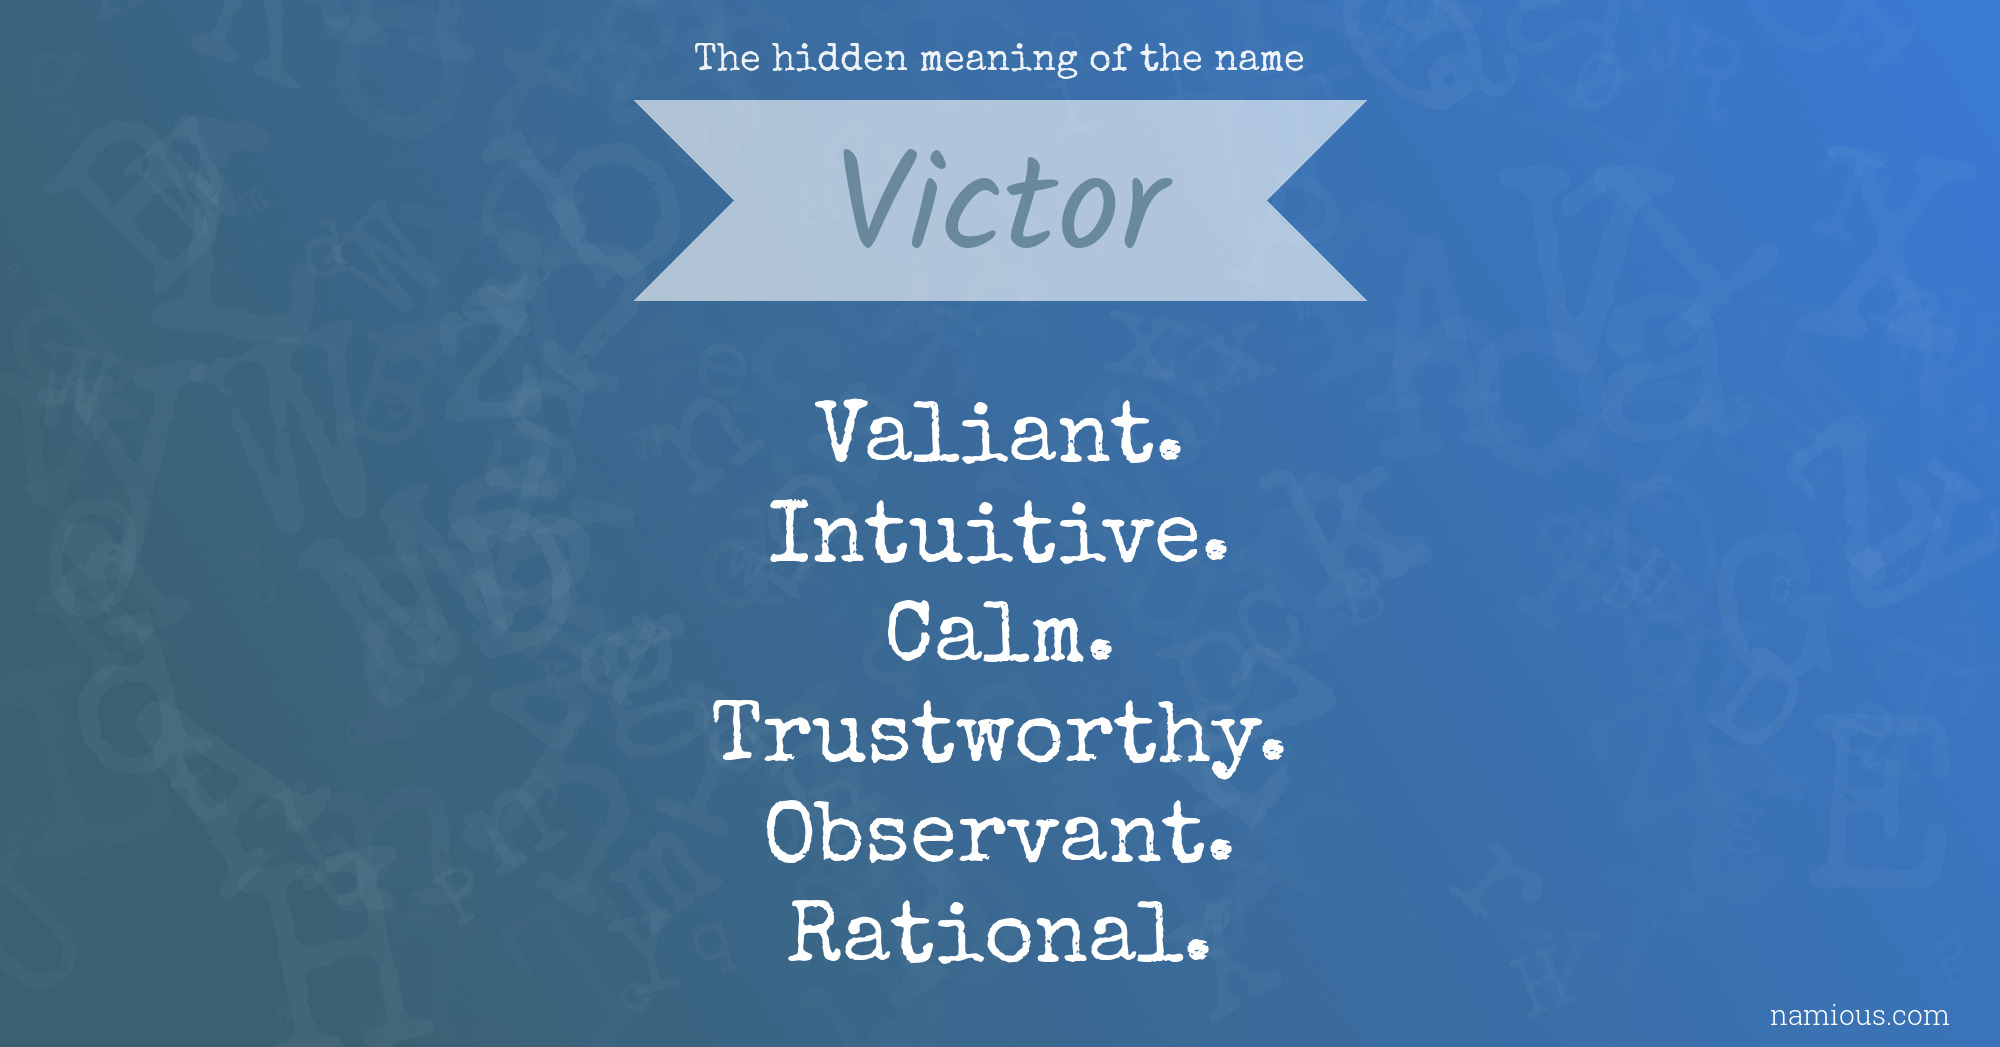 The hidden meaning of the name Victor